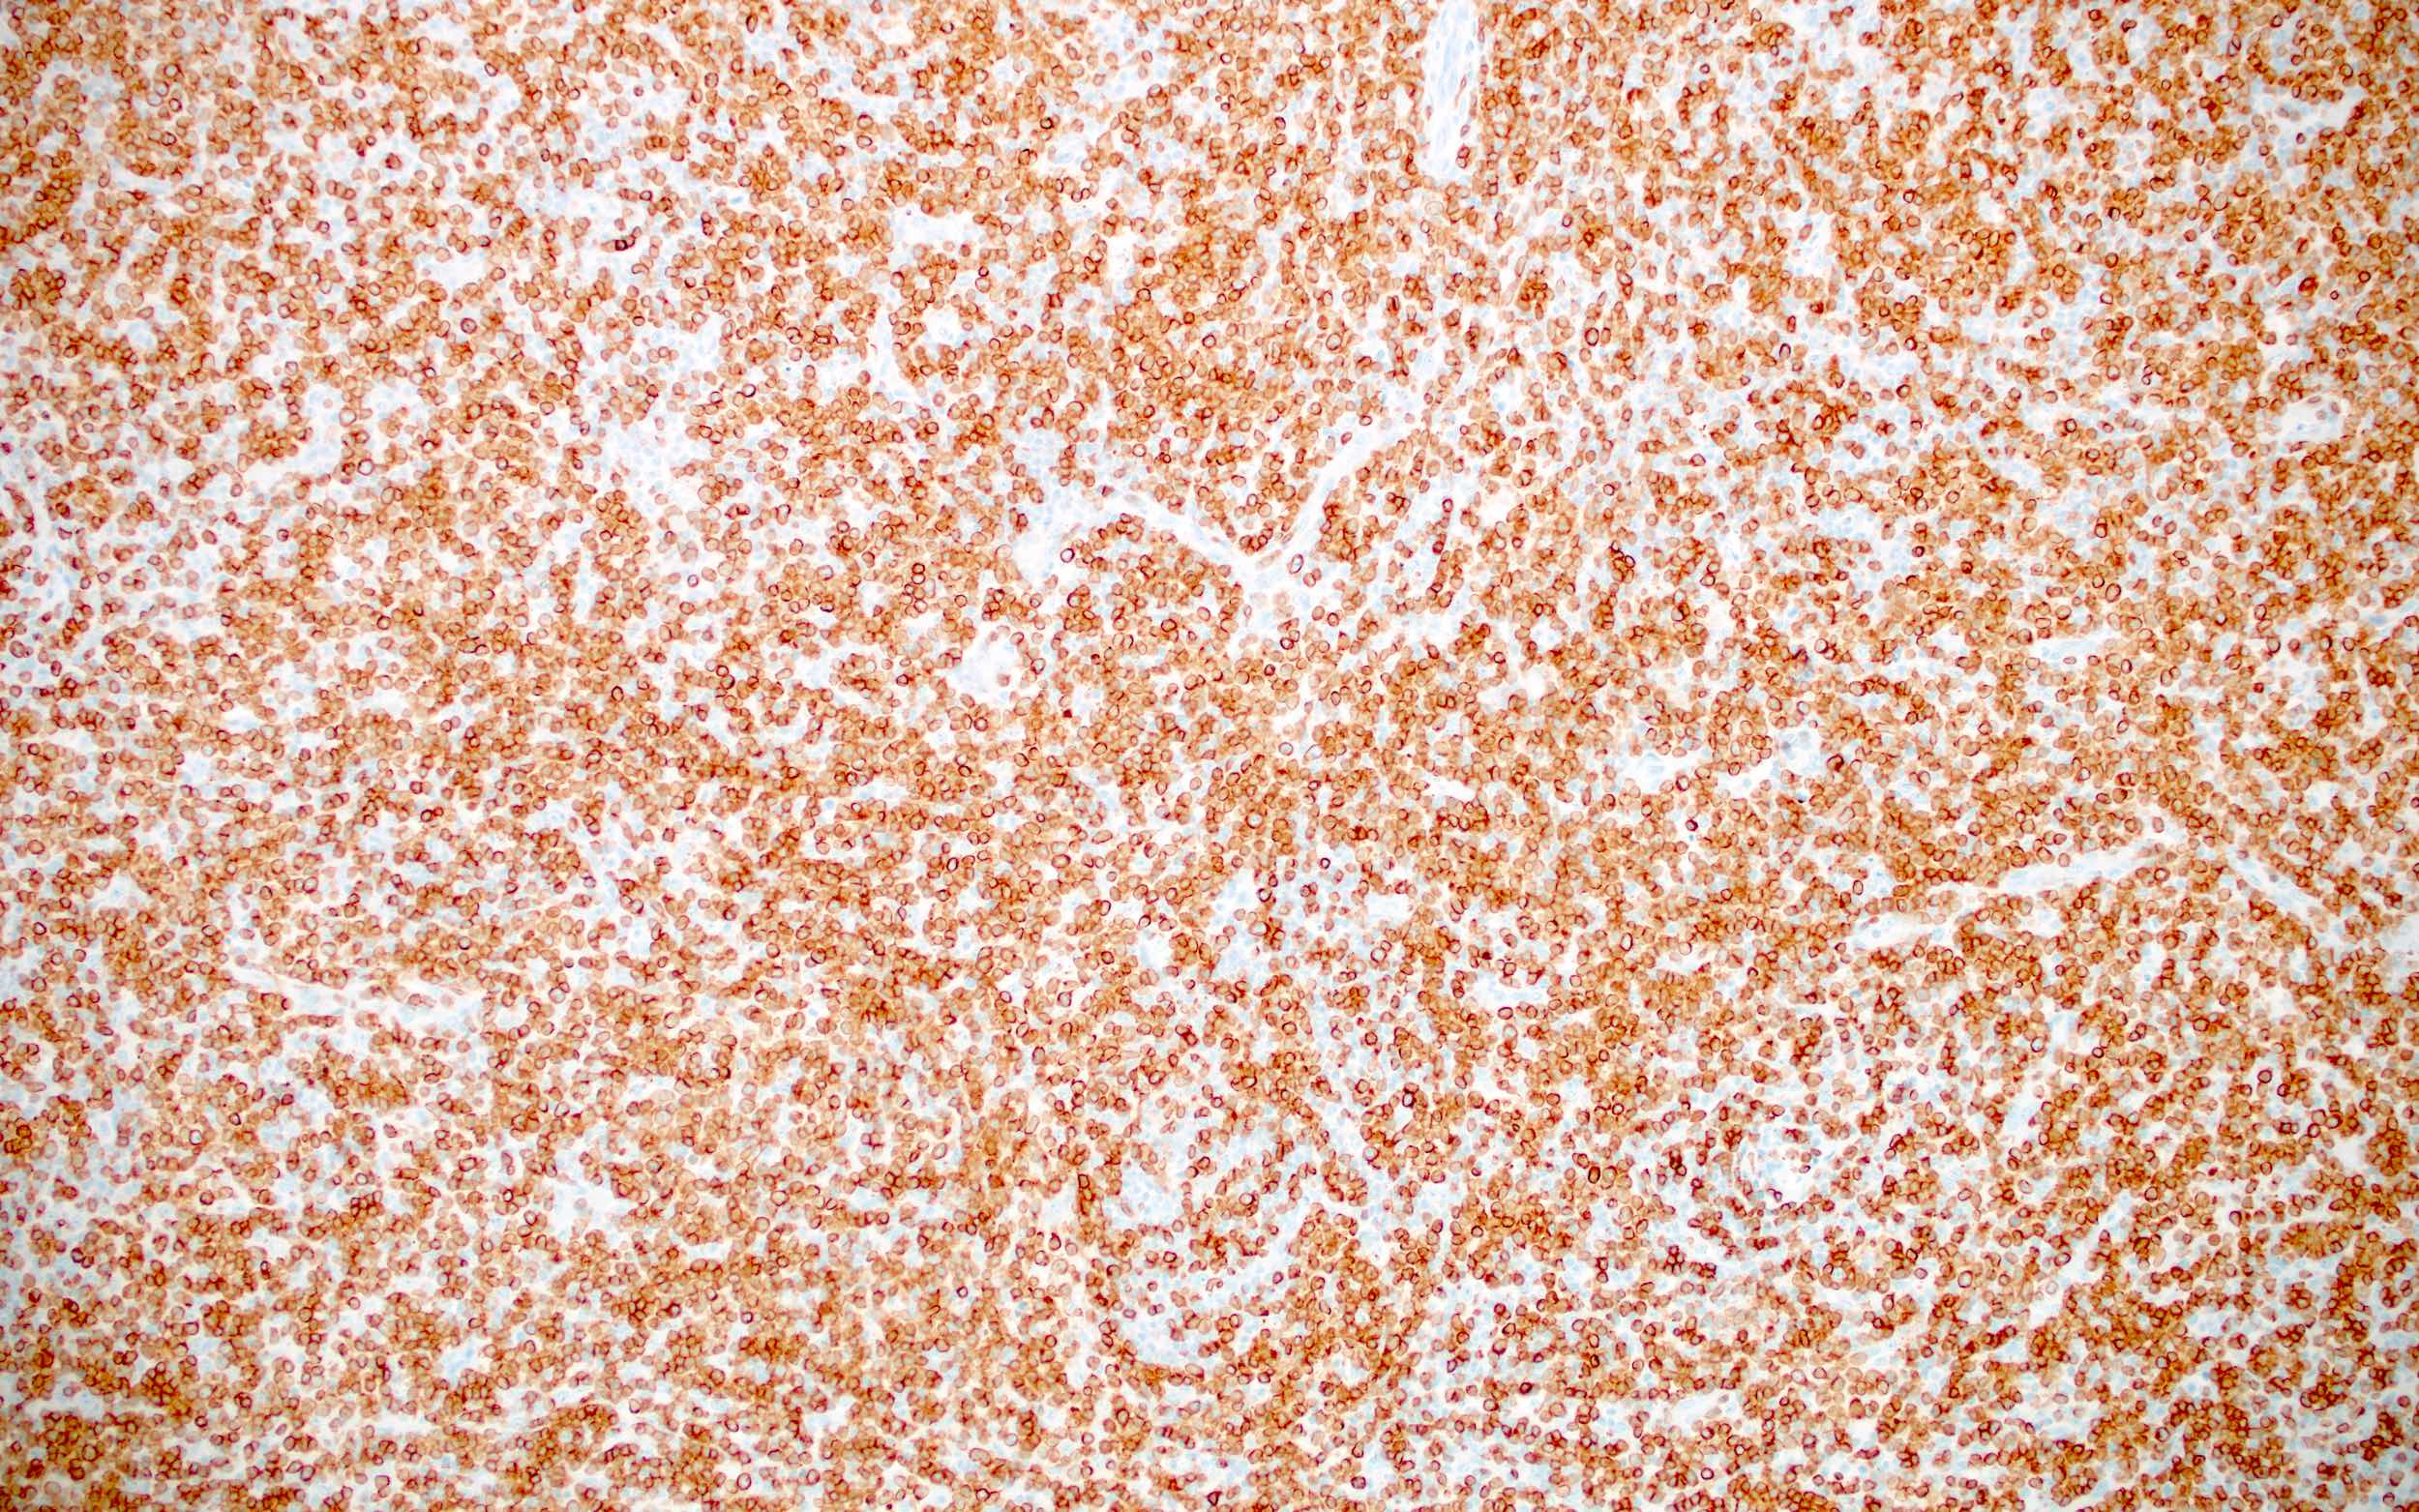 Atypical cells of AITL, CD3+